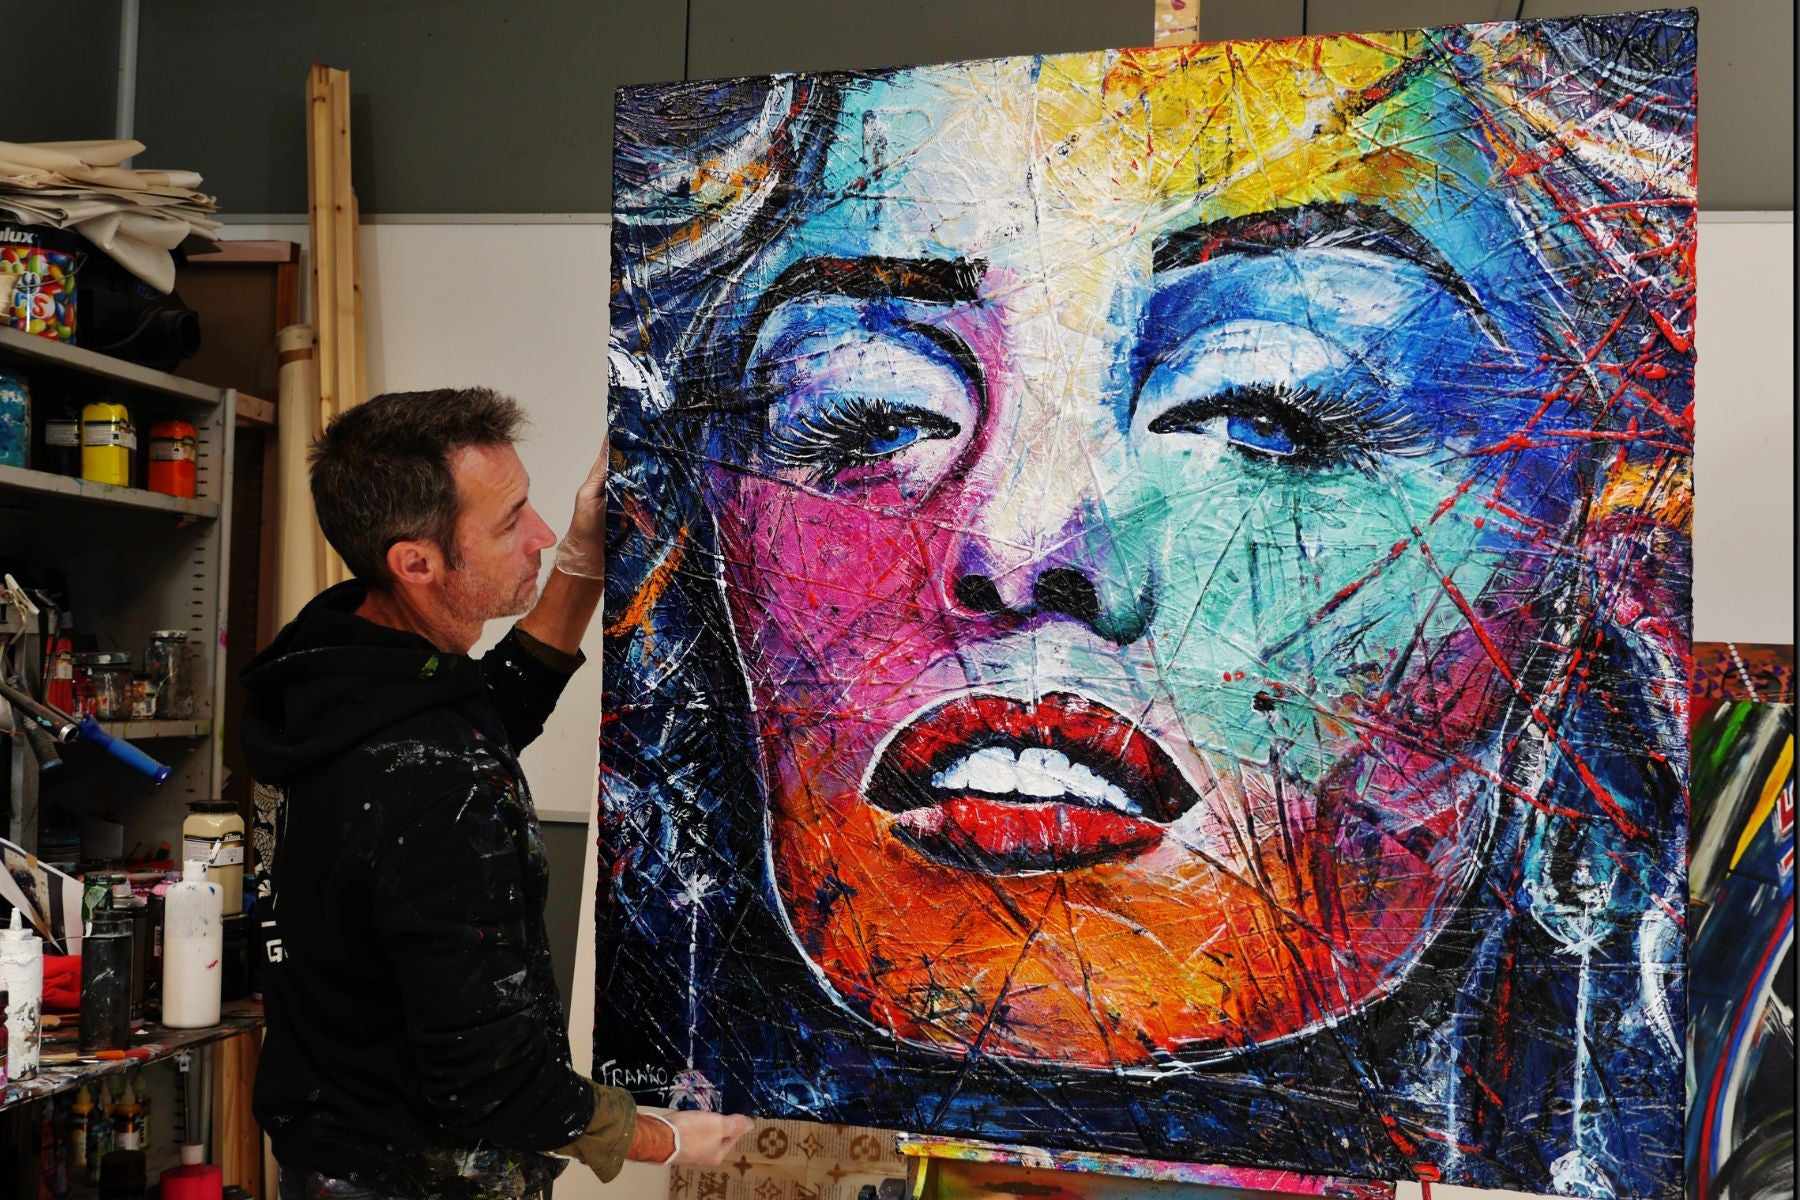 Miss M (M is for Marvelous) 120cm x 120cm Marilyn Monroe Abstract Realism Urban Pop Texture Painting (SOLD)-abstract realism-Franko-[franko_art]-[beautiful_Art]-[The_Block]-Franklin Art Studio